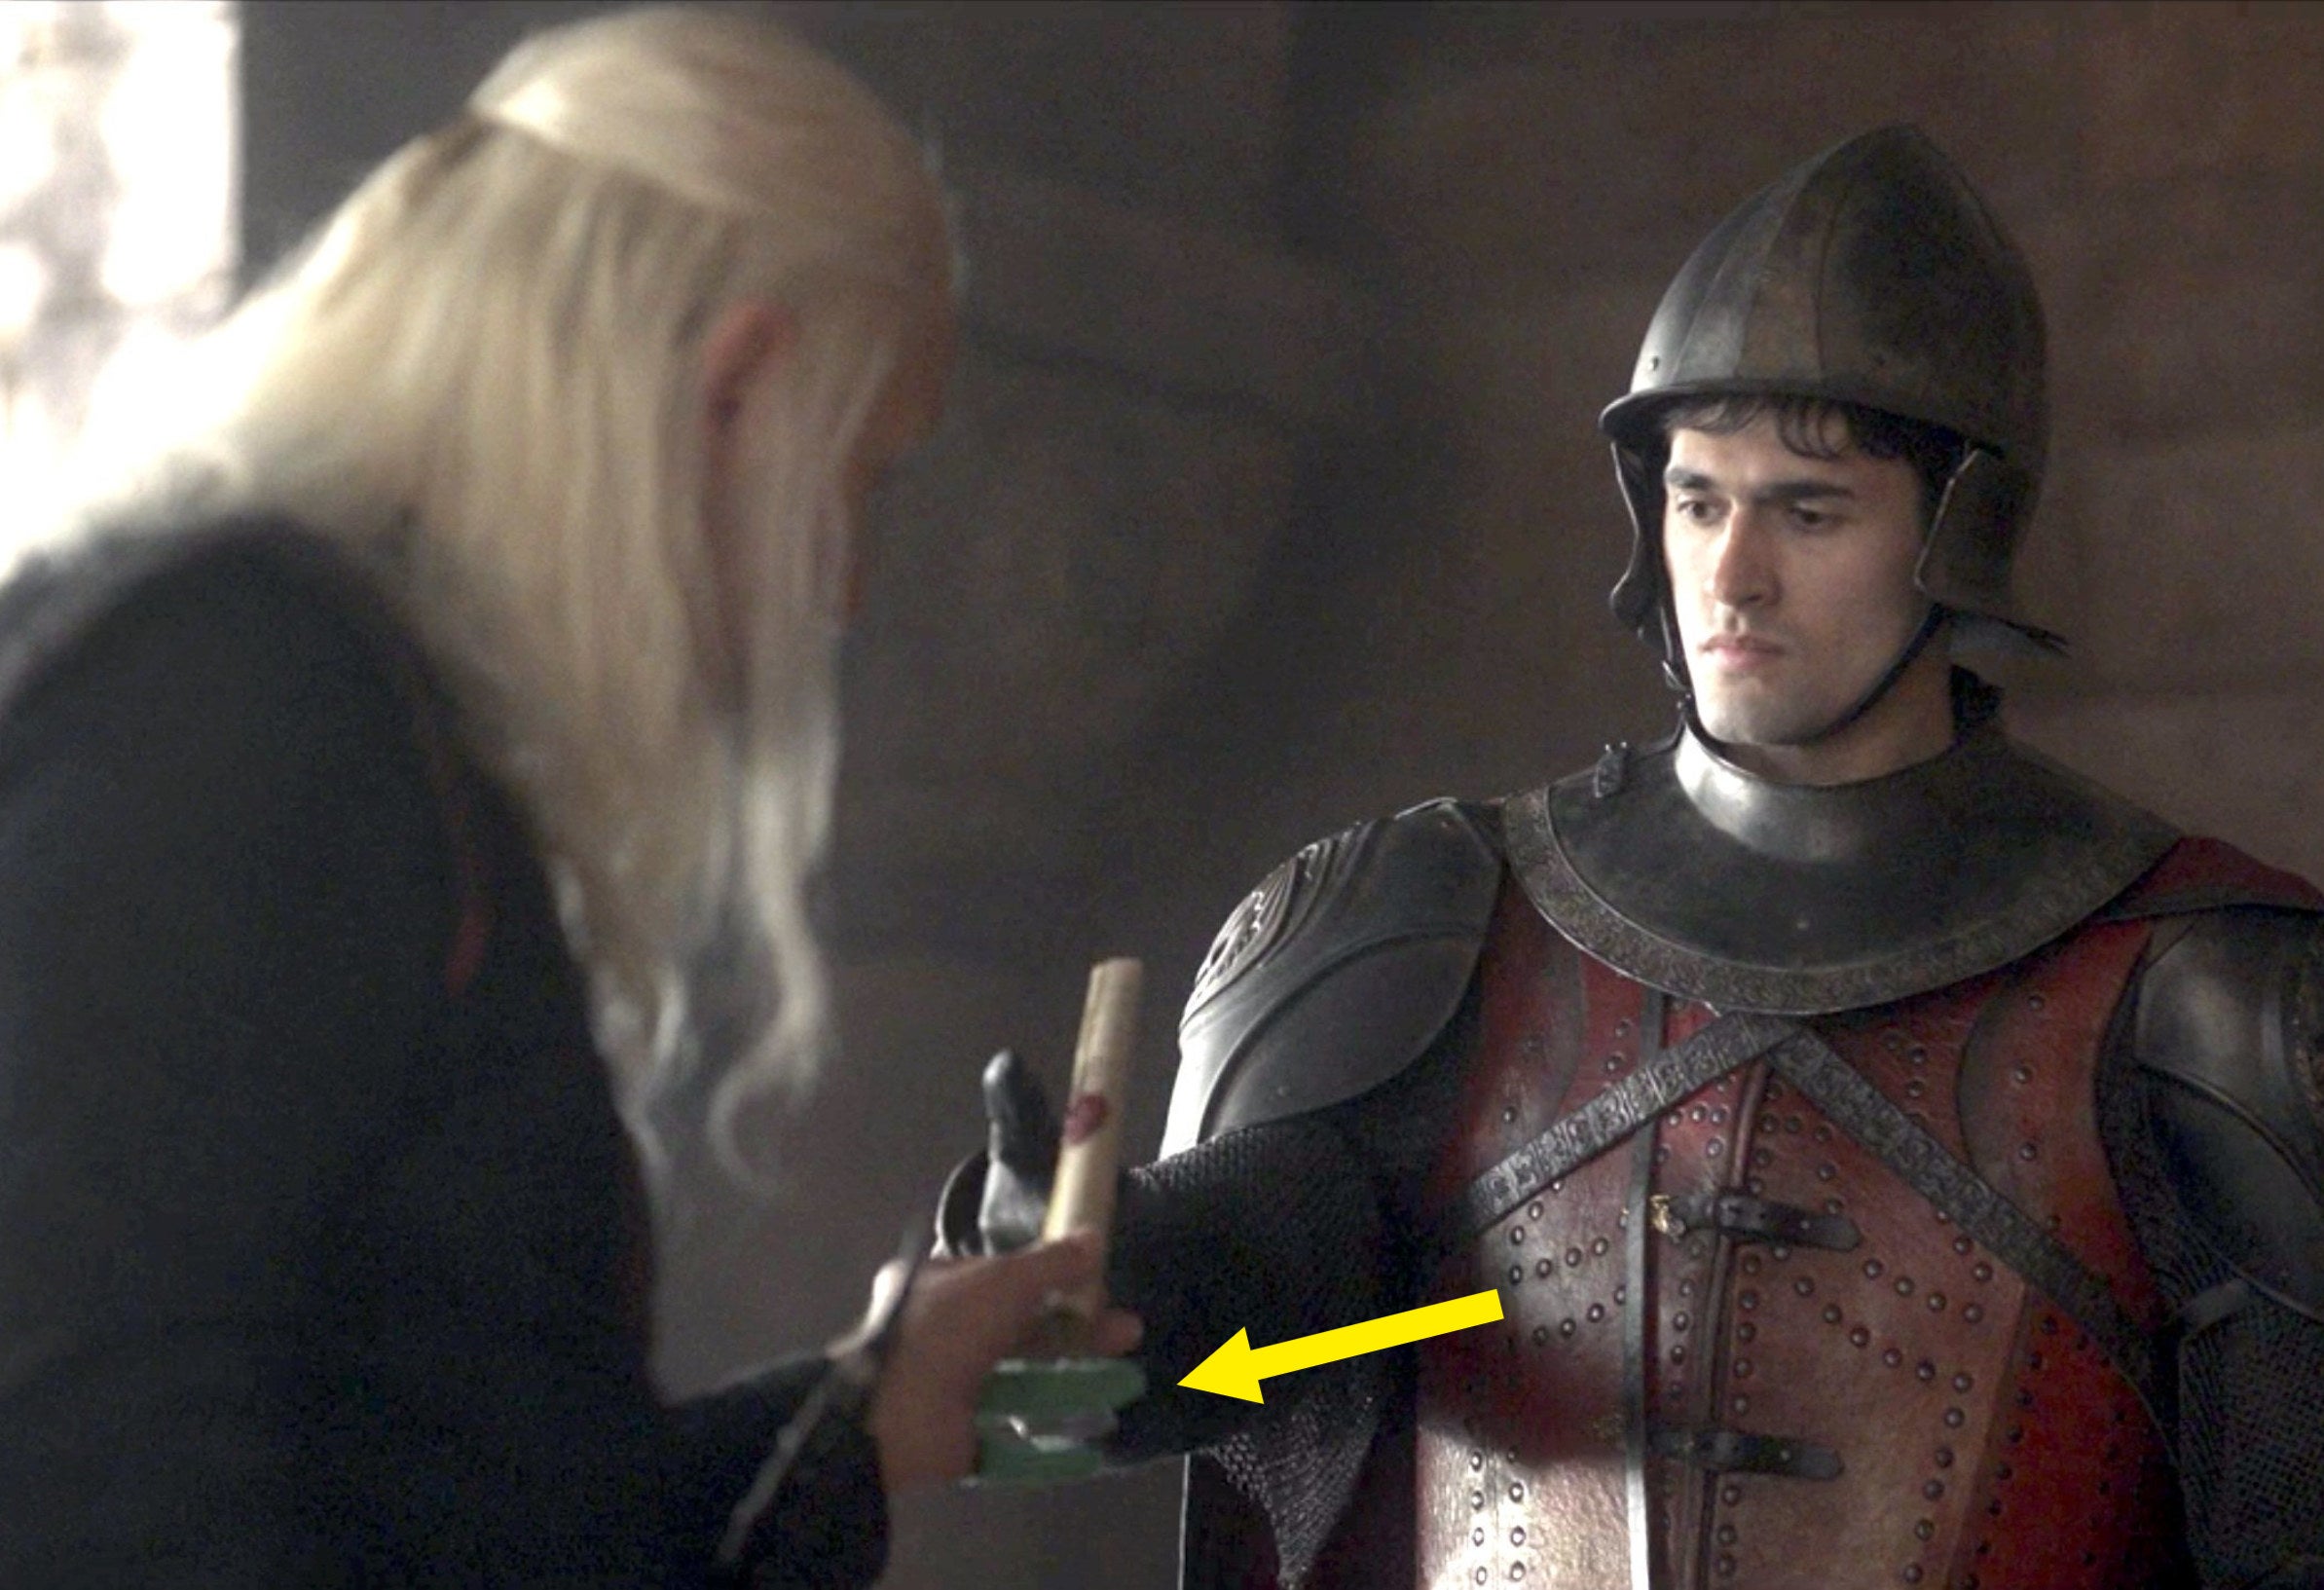 King Viserys holds a scroll but the actor is wearing green screen material on two of his fingers